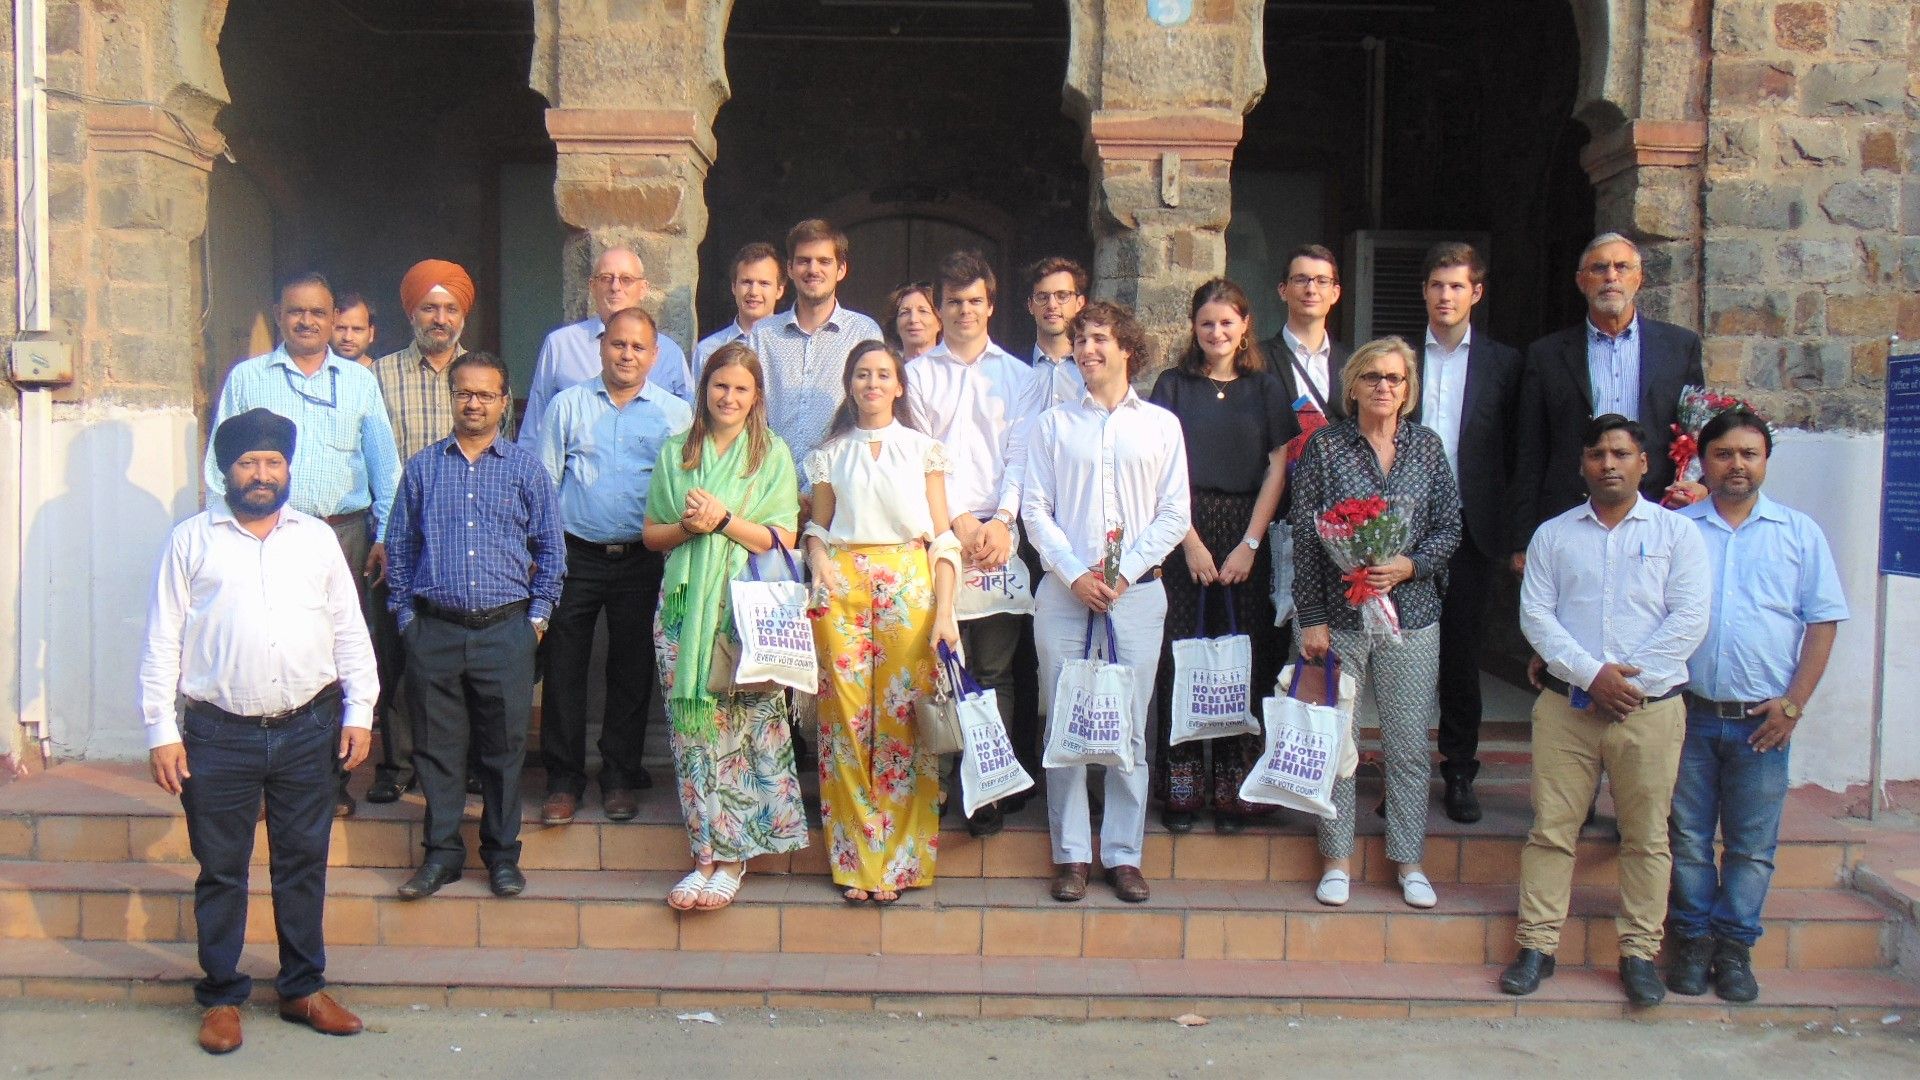 Visit of members from Olivaint Conference of Belgium at Election Museum in Chief Electoral Office, Delhi at Kashmere Gate, Delhi